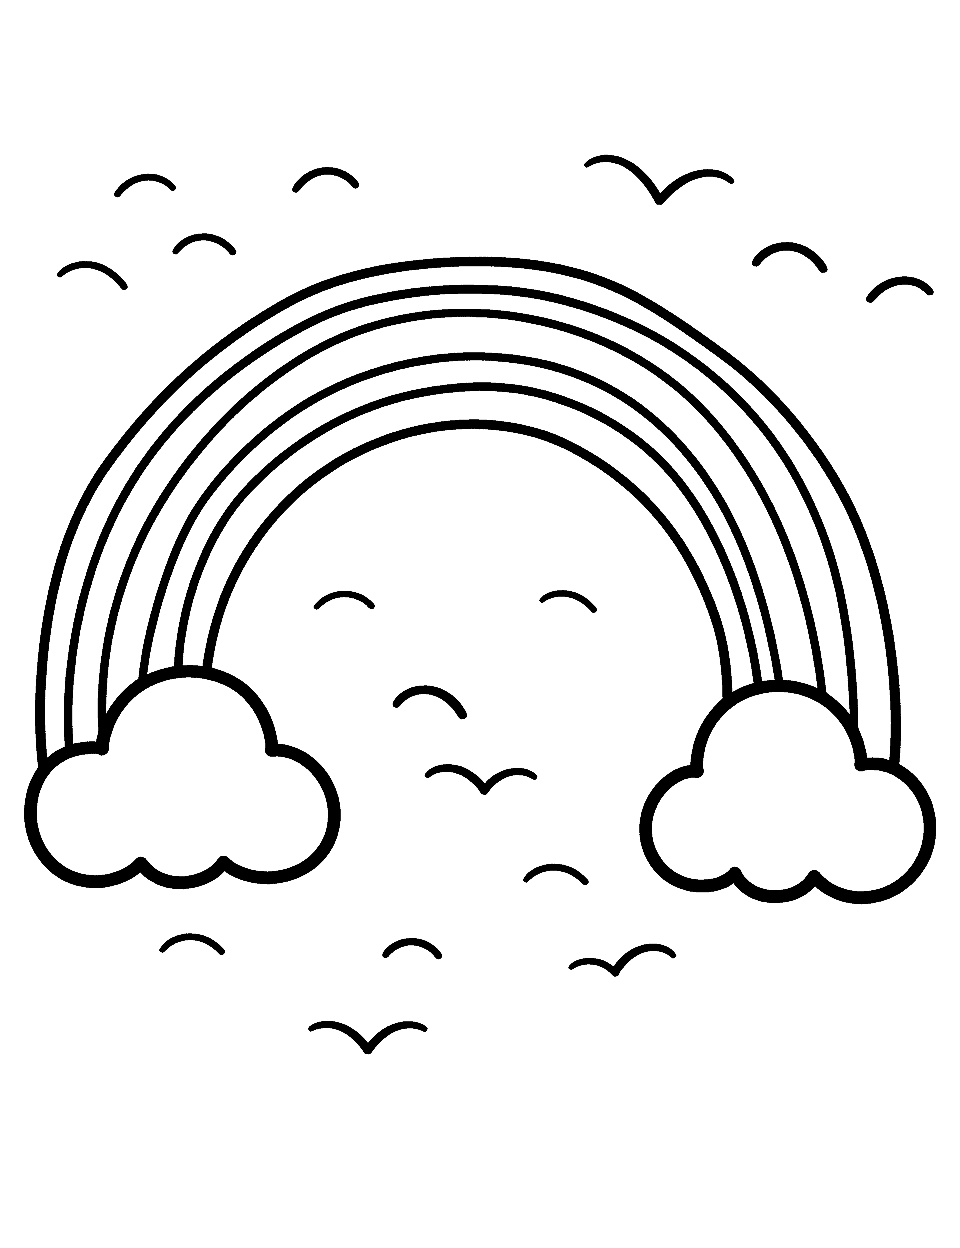 Simple Rainbow Coloring Page - A basic and easy-to-color rainbow, ideal for very young kids.